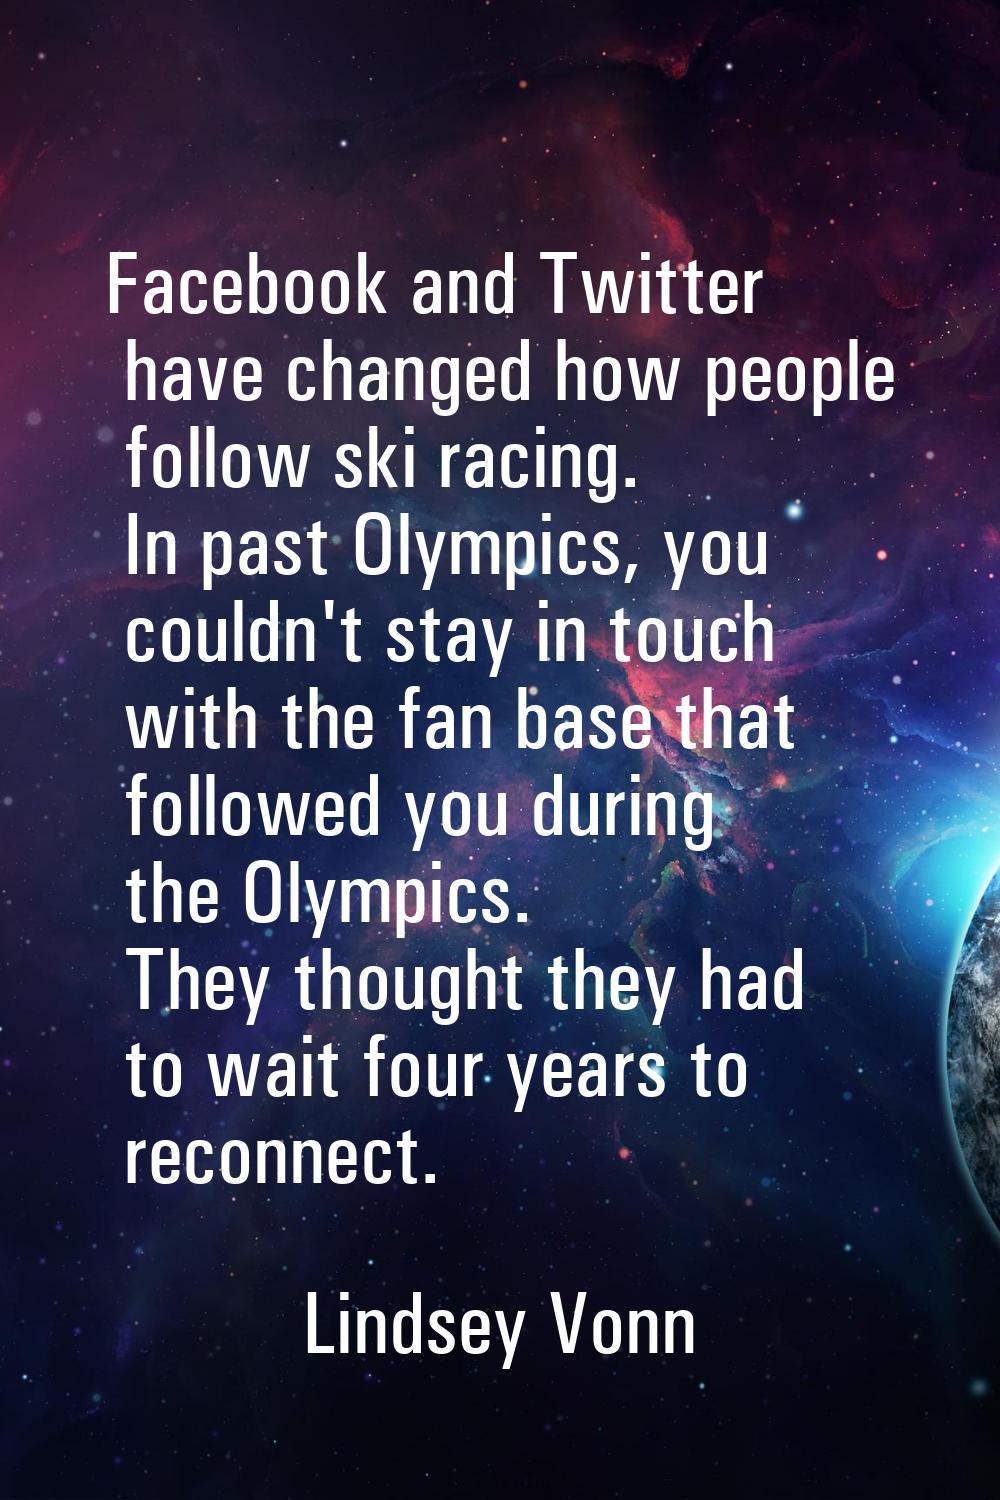 Facebook and Twitter have changed how people follow ski racing. In past Olympics, you couldn't stay